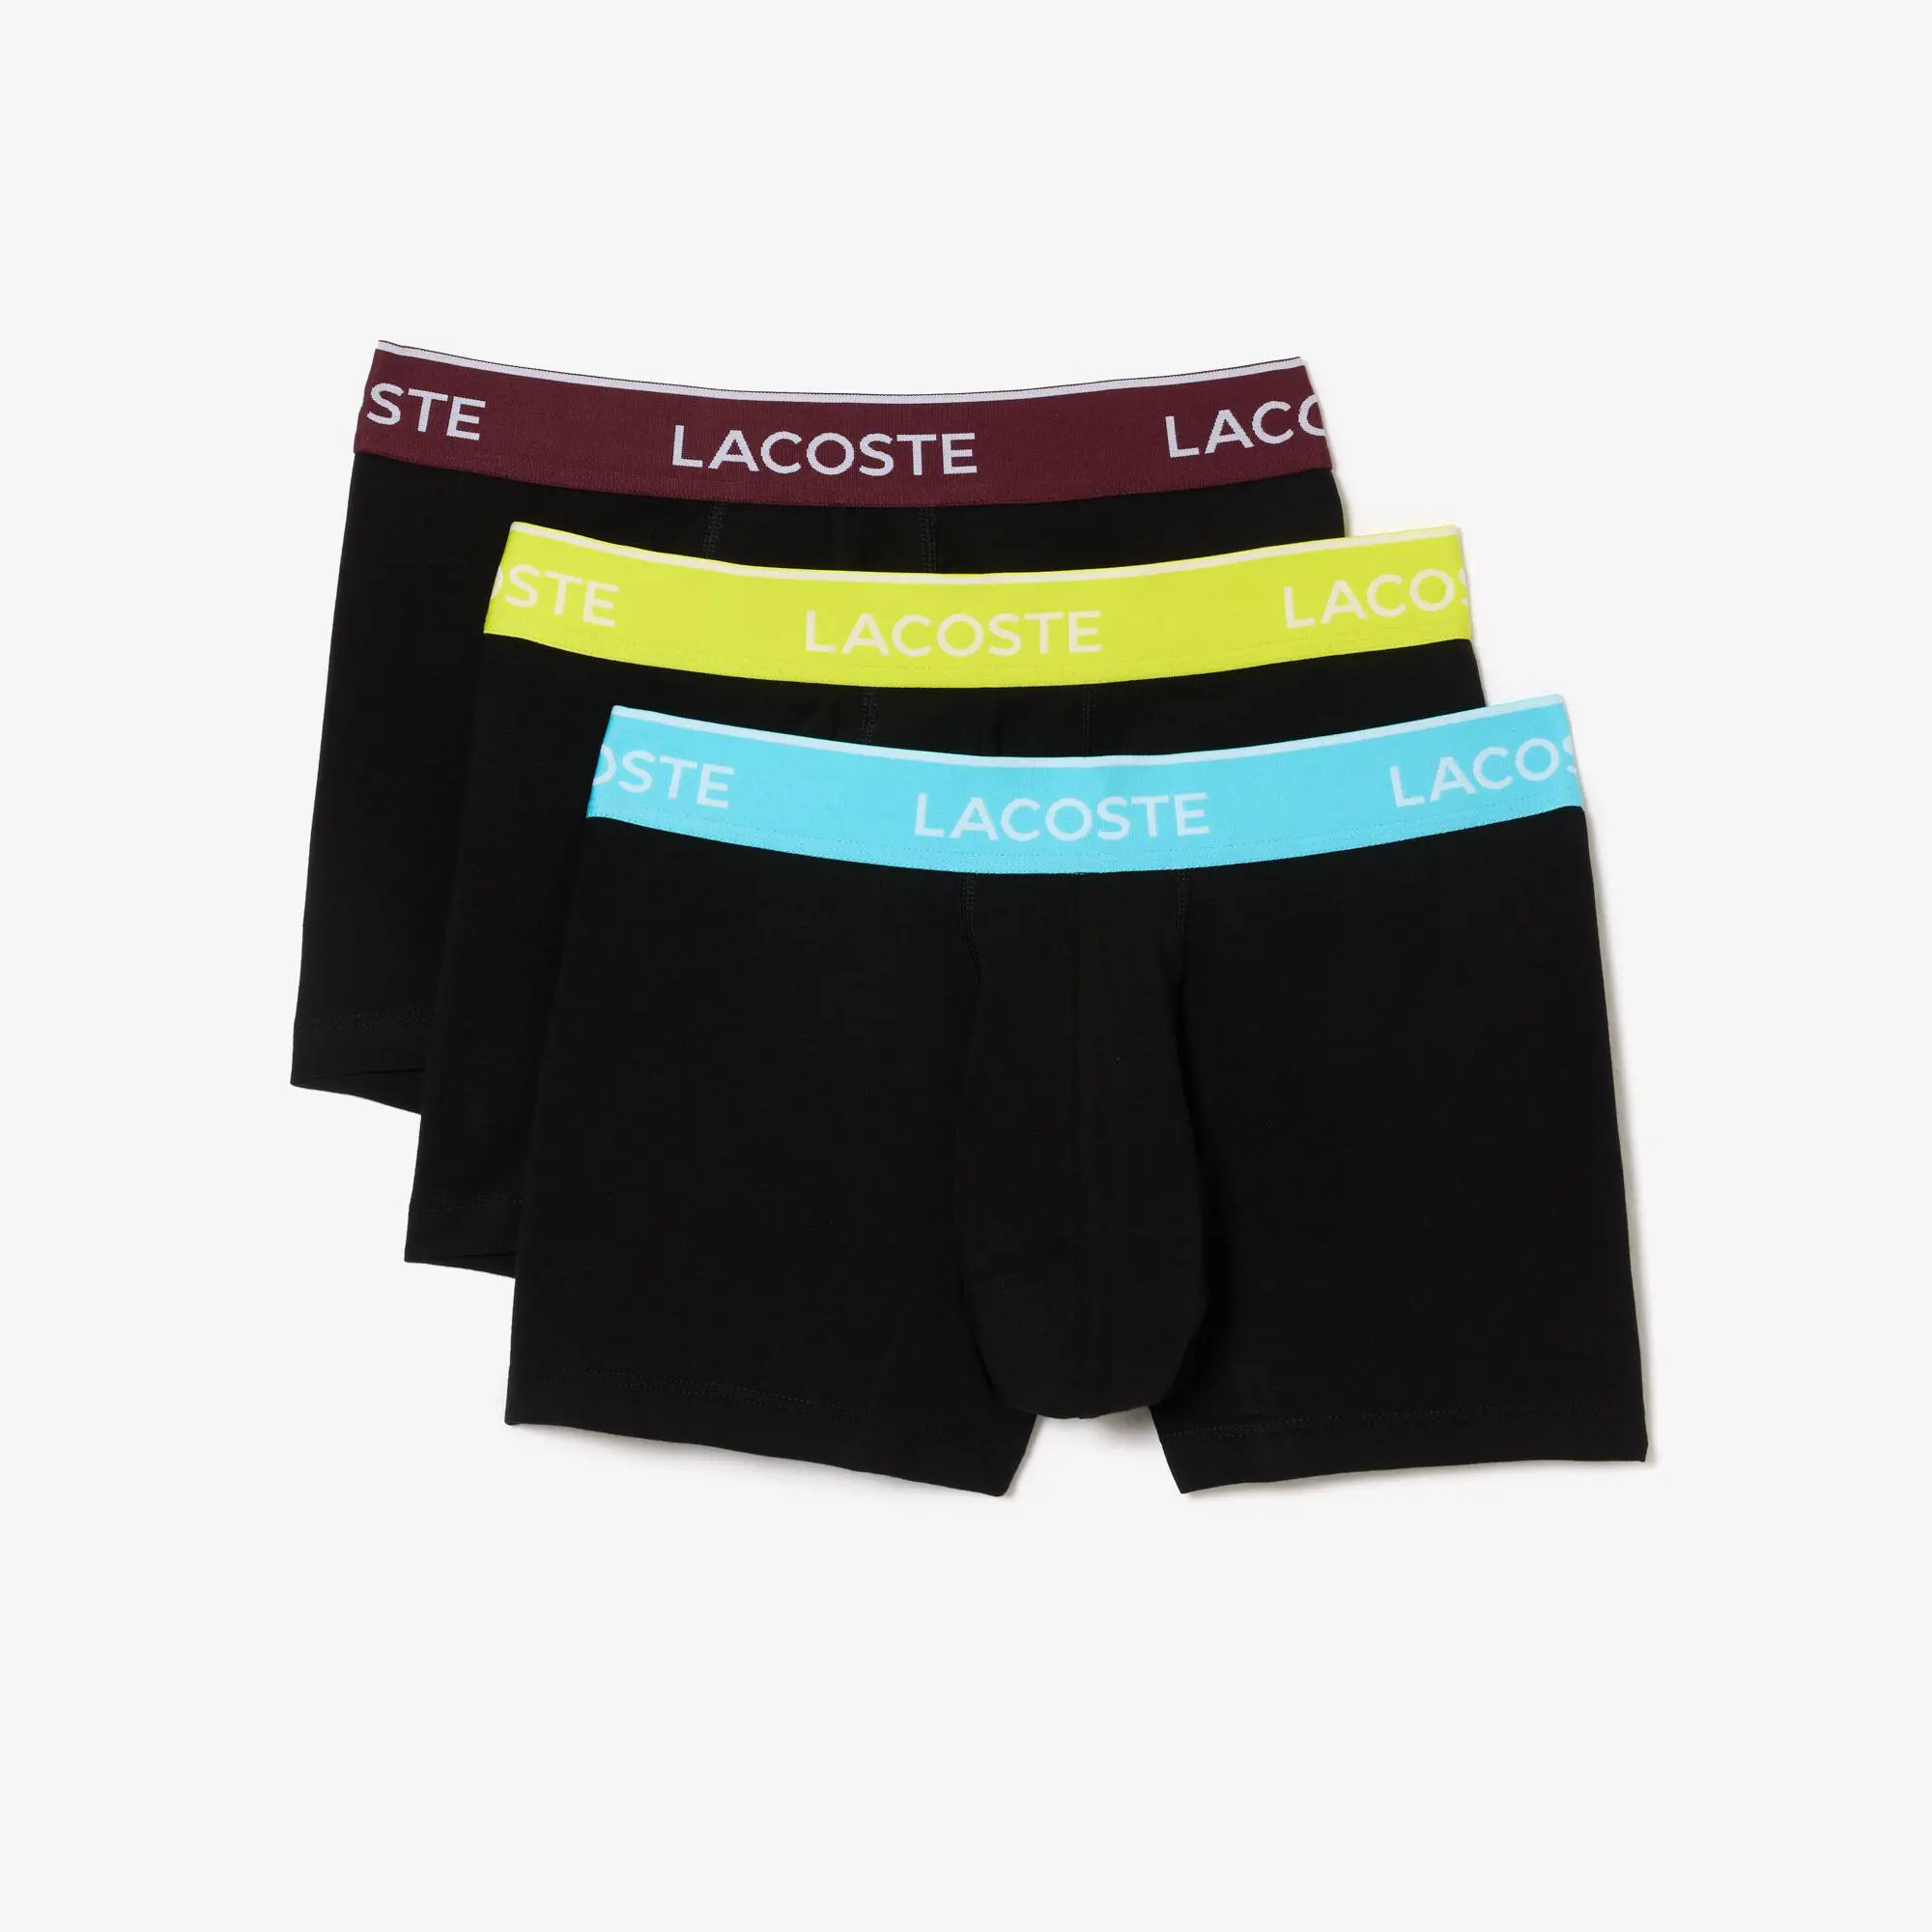 Lacoste Pack Of 3 Navy Casual Trunks With Contrasting Waistband. 2